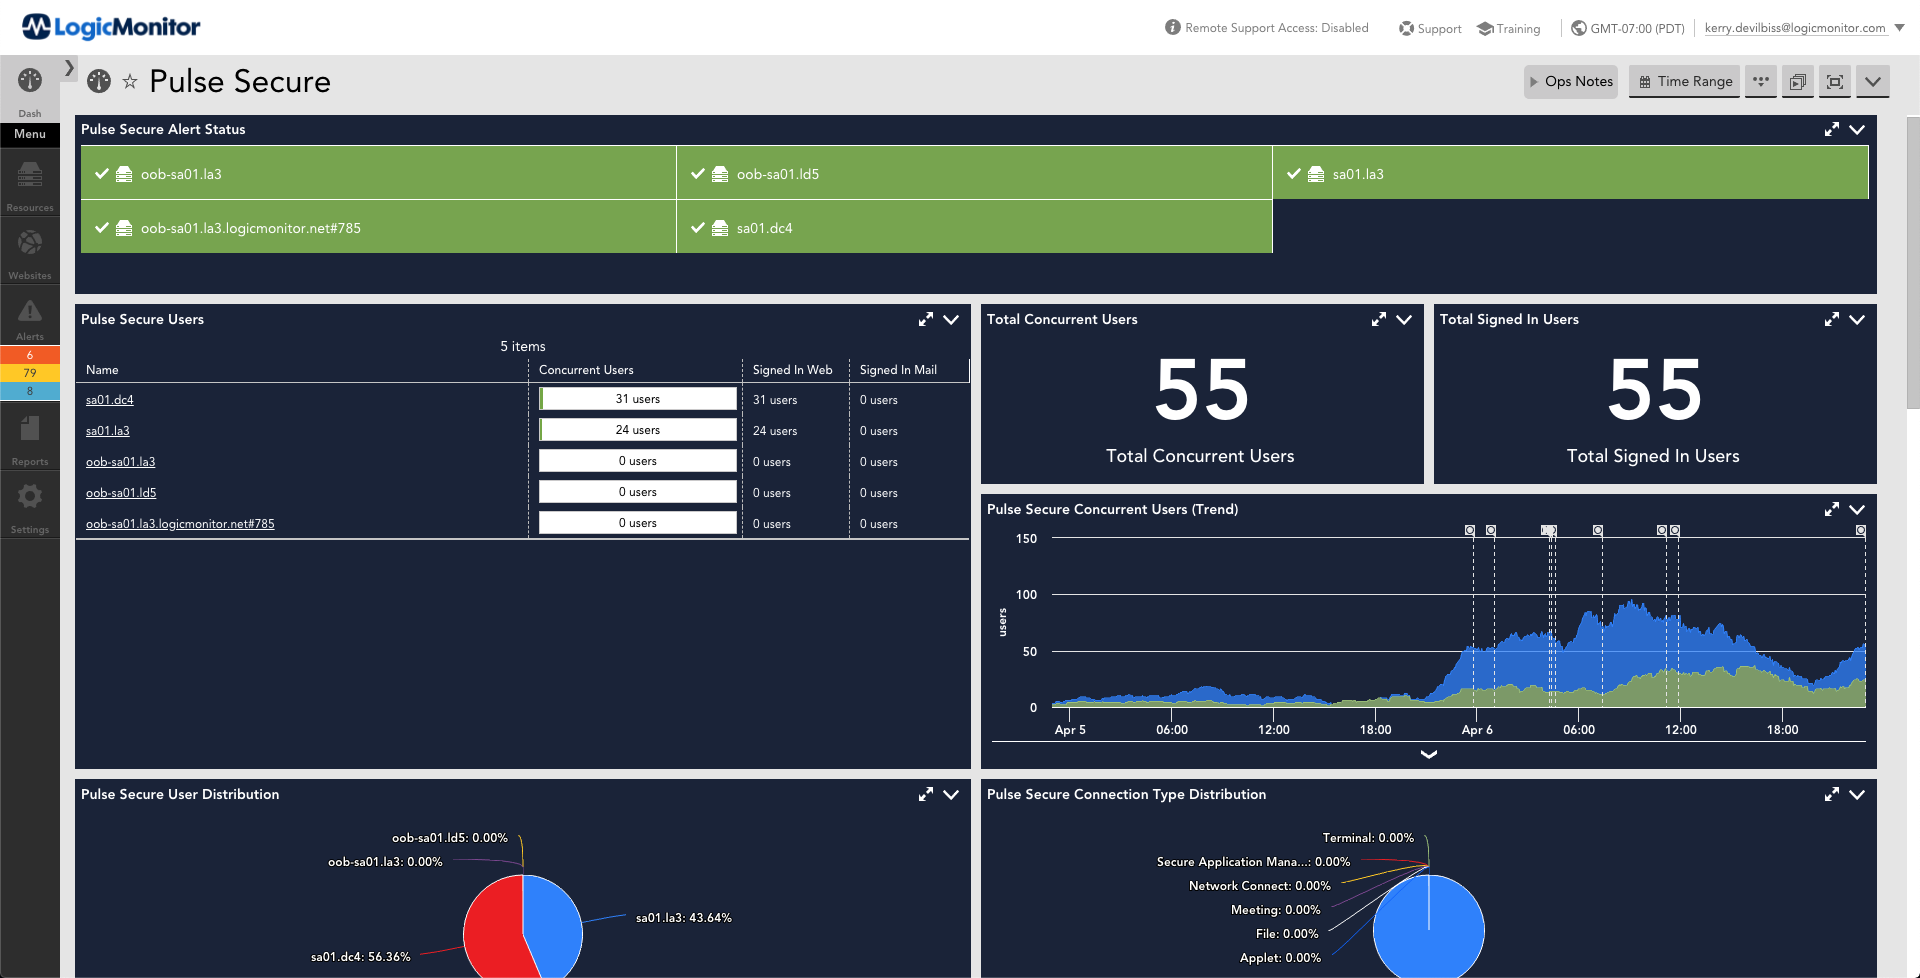 http://This%20dashboard%20provides%20an%20a%20listing%20of%20various%20metrics%20that%20are%20monitored%20for%20Pulse%20Secure%20VPN.%20The%20metrics%20displayed%20are%20status,%20real-time%20user%20statistics,%20concurrent%20user%20count,%20signed%20in%20user%20count,%20concurrent%20users%20over%20time,%20secure%20user%20distribution,%20secure%20connection%20distribution